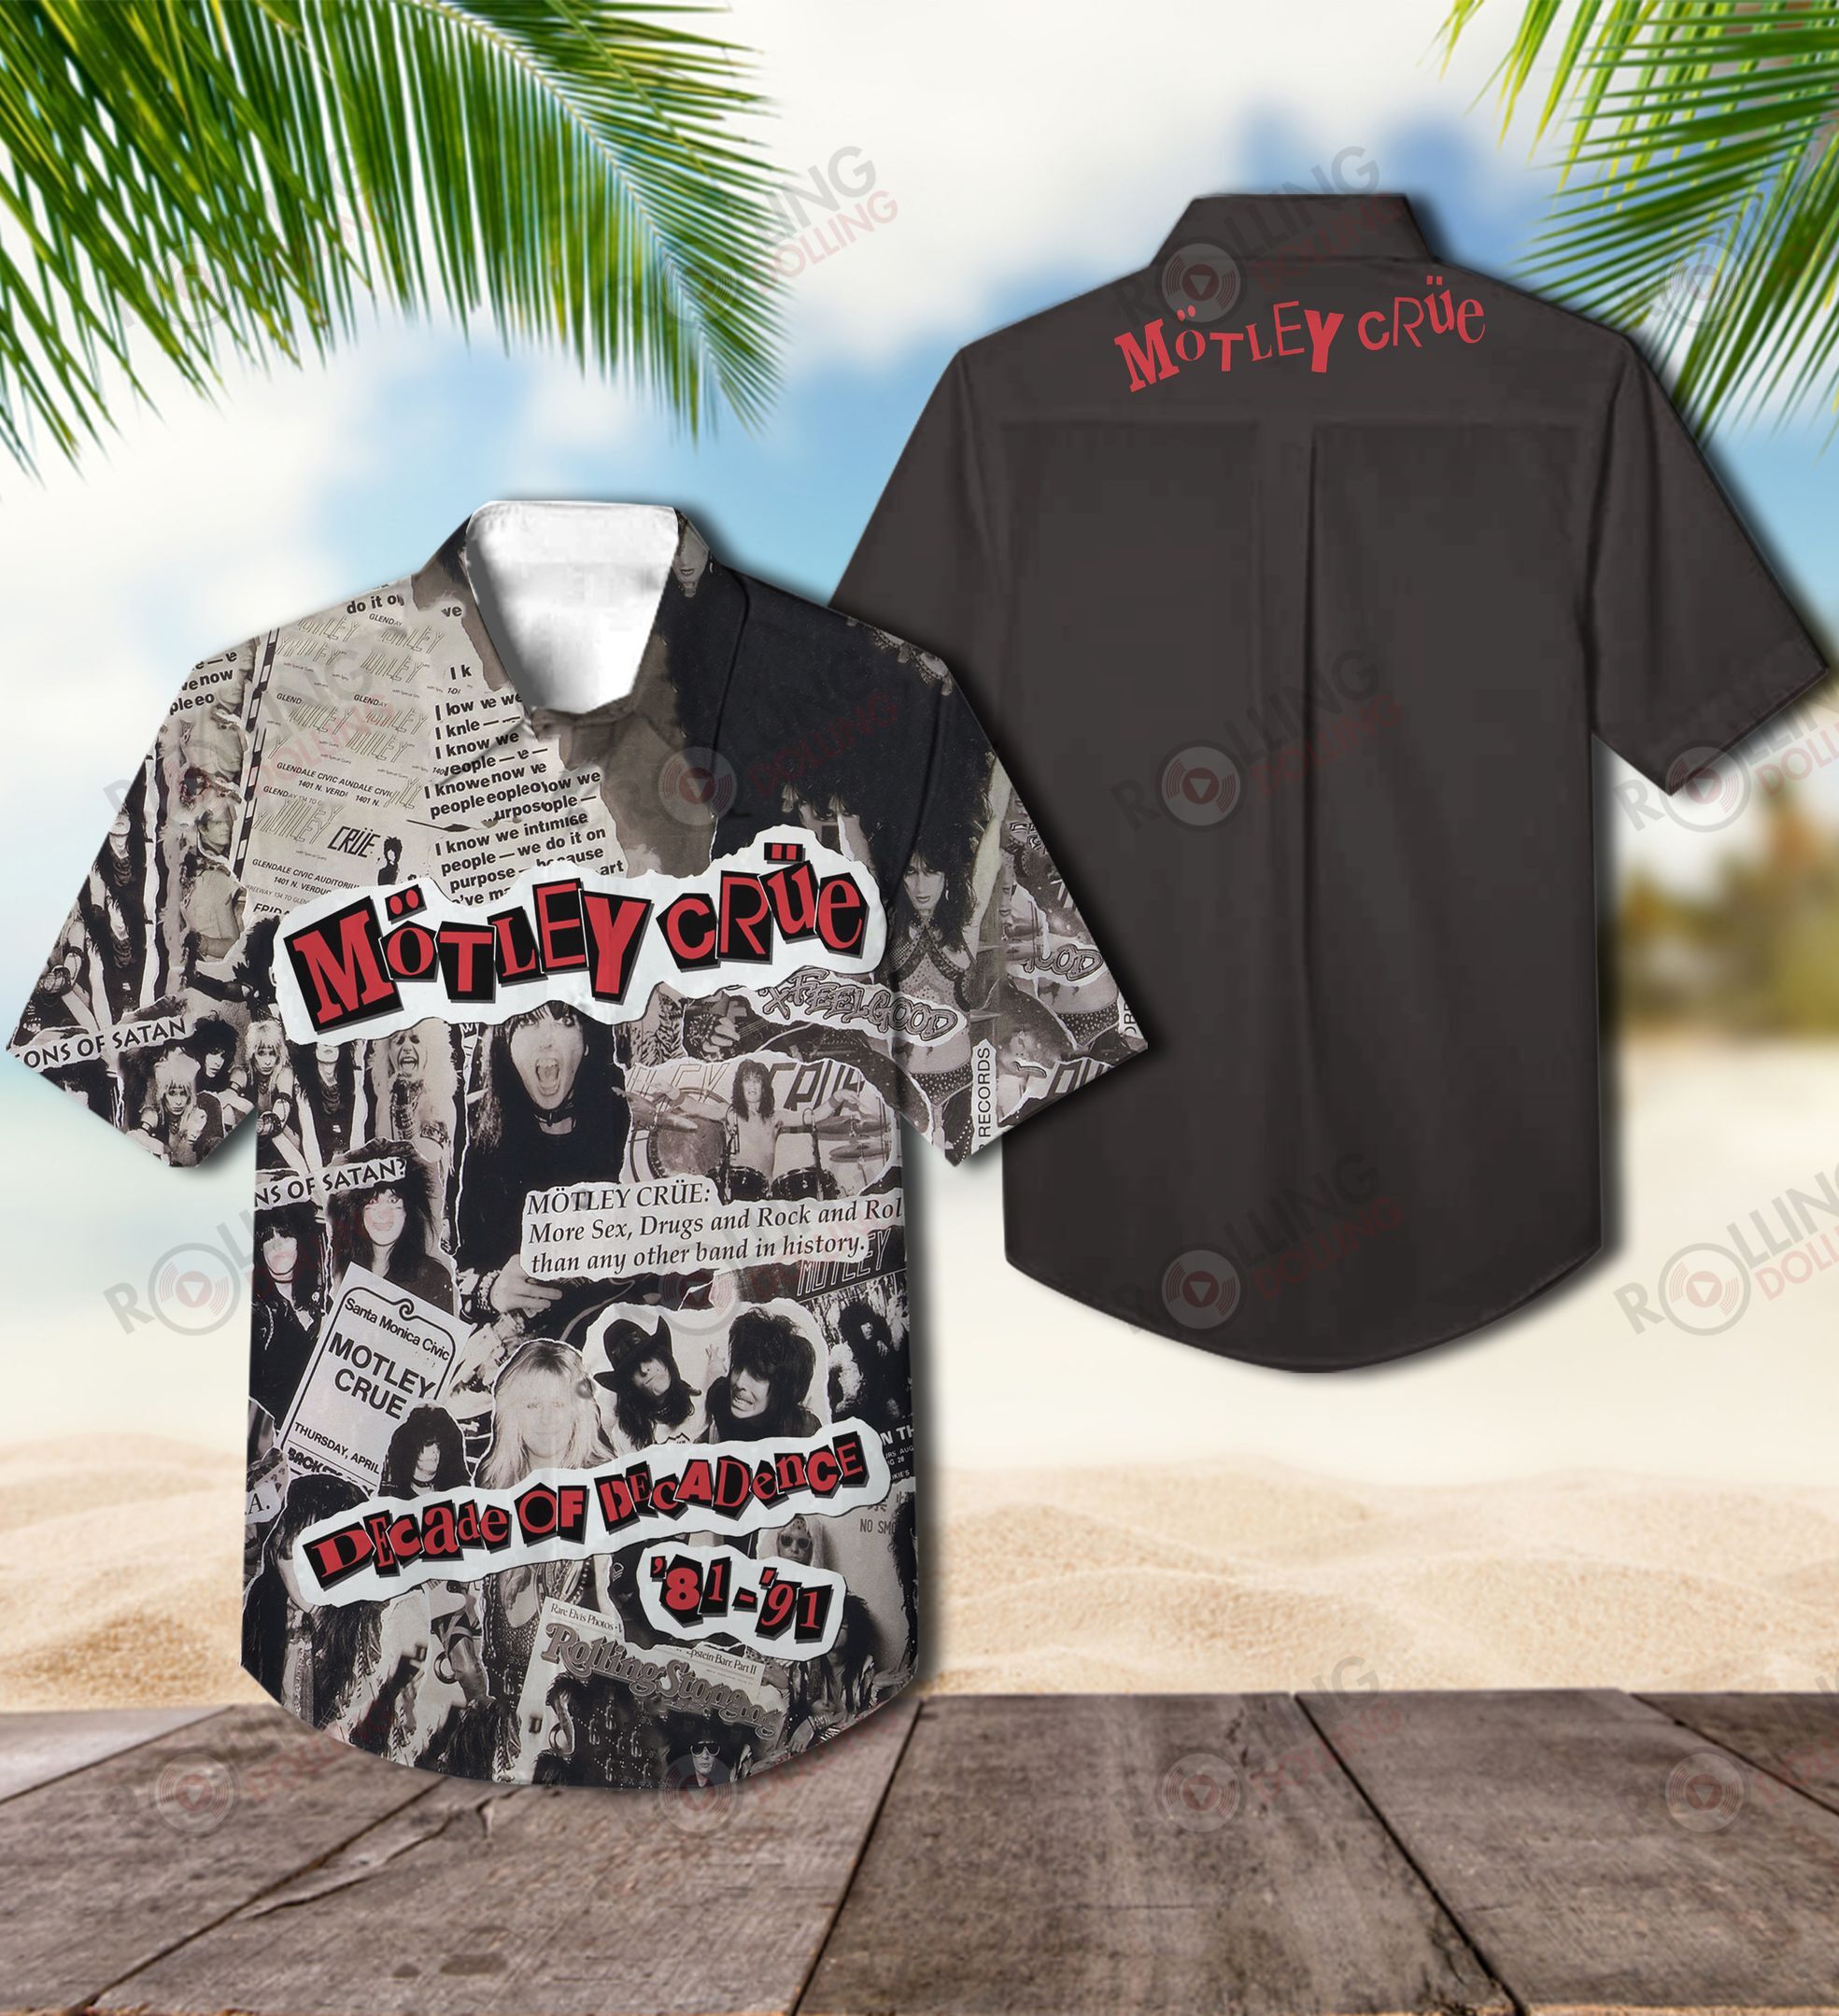 We have compiled a list of some of the best Hawaiian shirt that are available 165